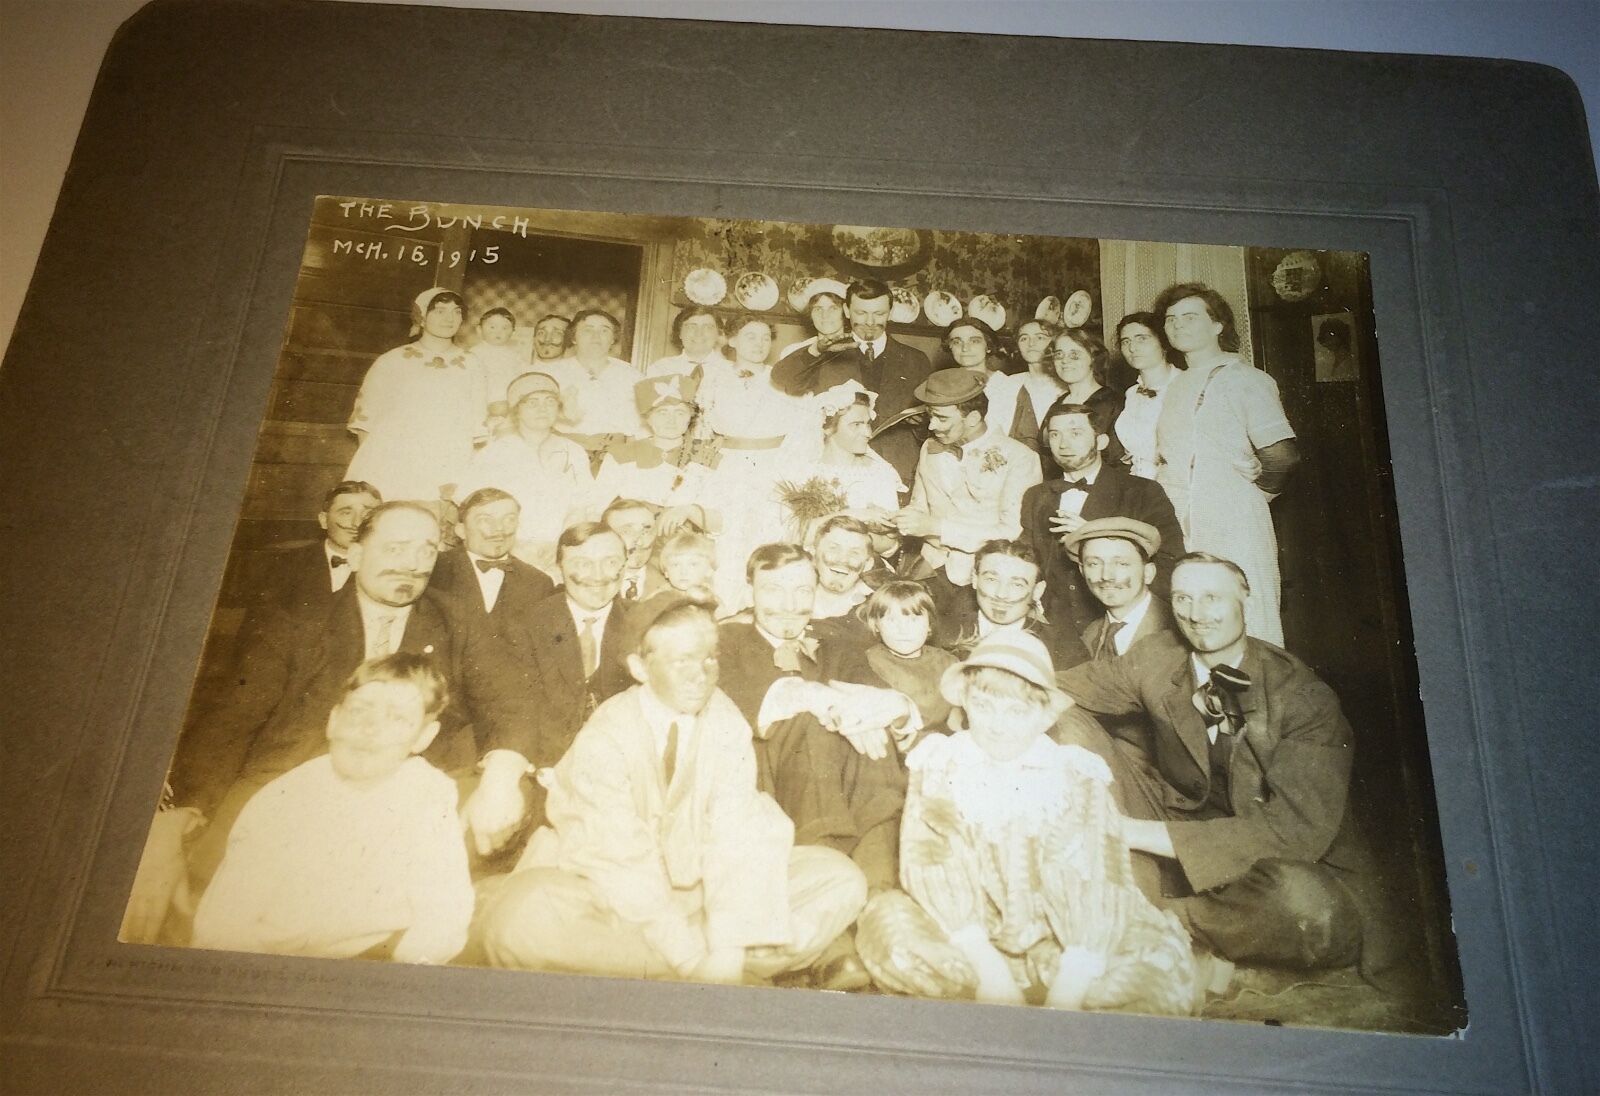 Antique C.1915 American The Bunch Wild Group of Comical Characters Cabinet Photo